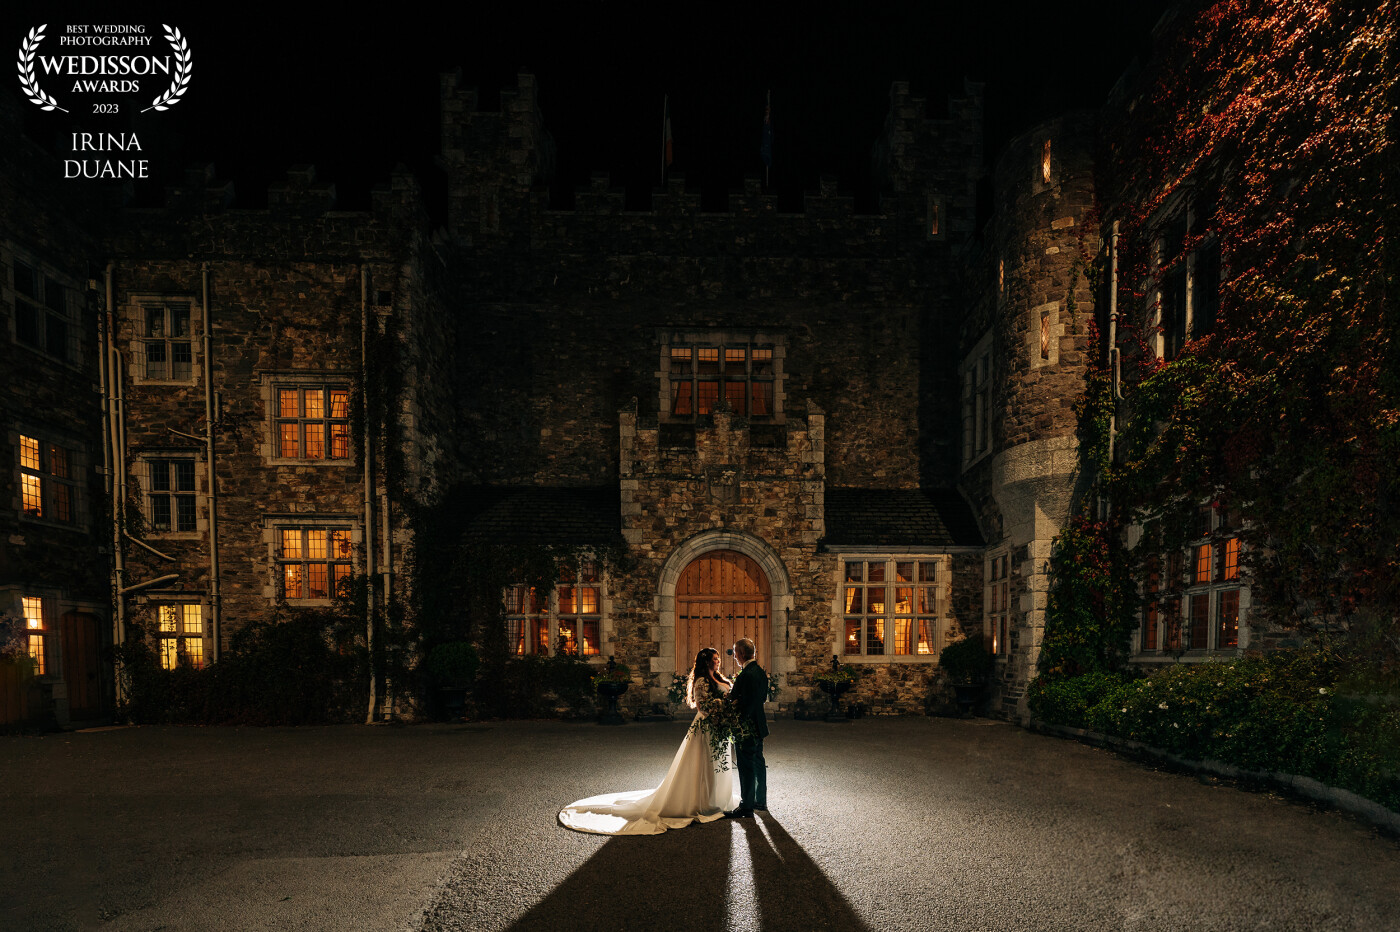 Kate and Sean traveled with close family and friends from USA to tie the knot in Ireland at the lovely Waterford Castle, co. Waterford. Waterford Castle is a beautiful venue or a wedding and taking photos at night can create a romantic atmosphere.